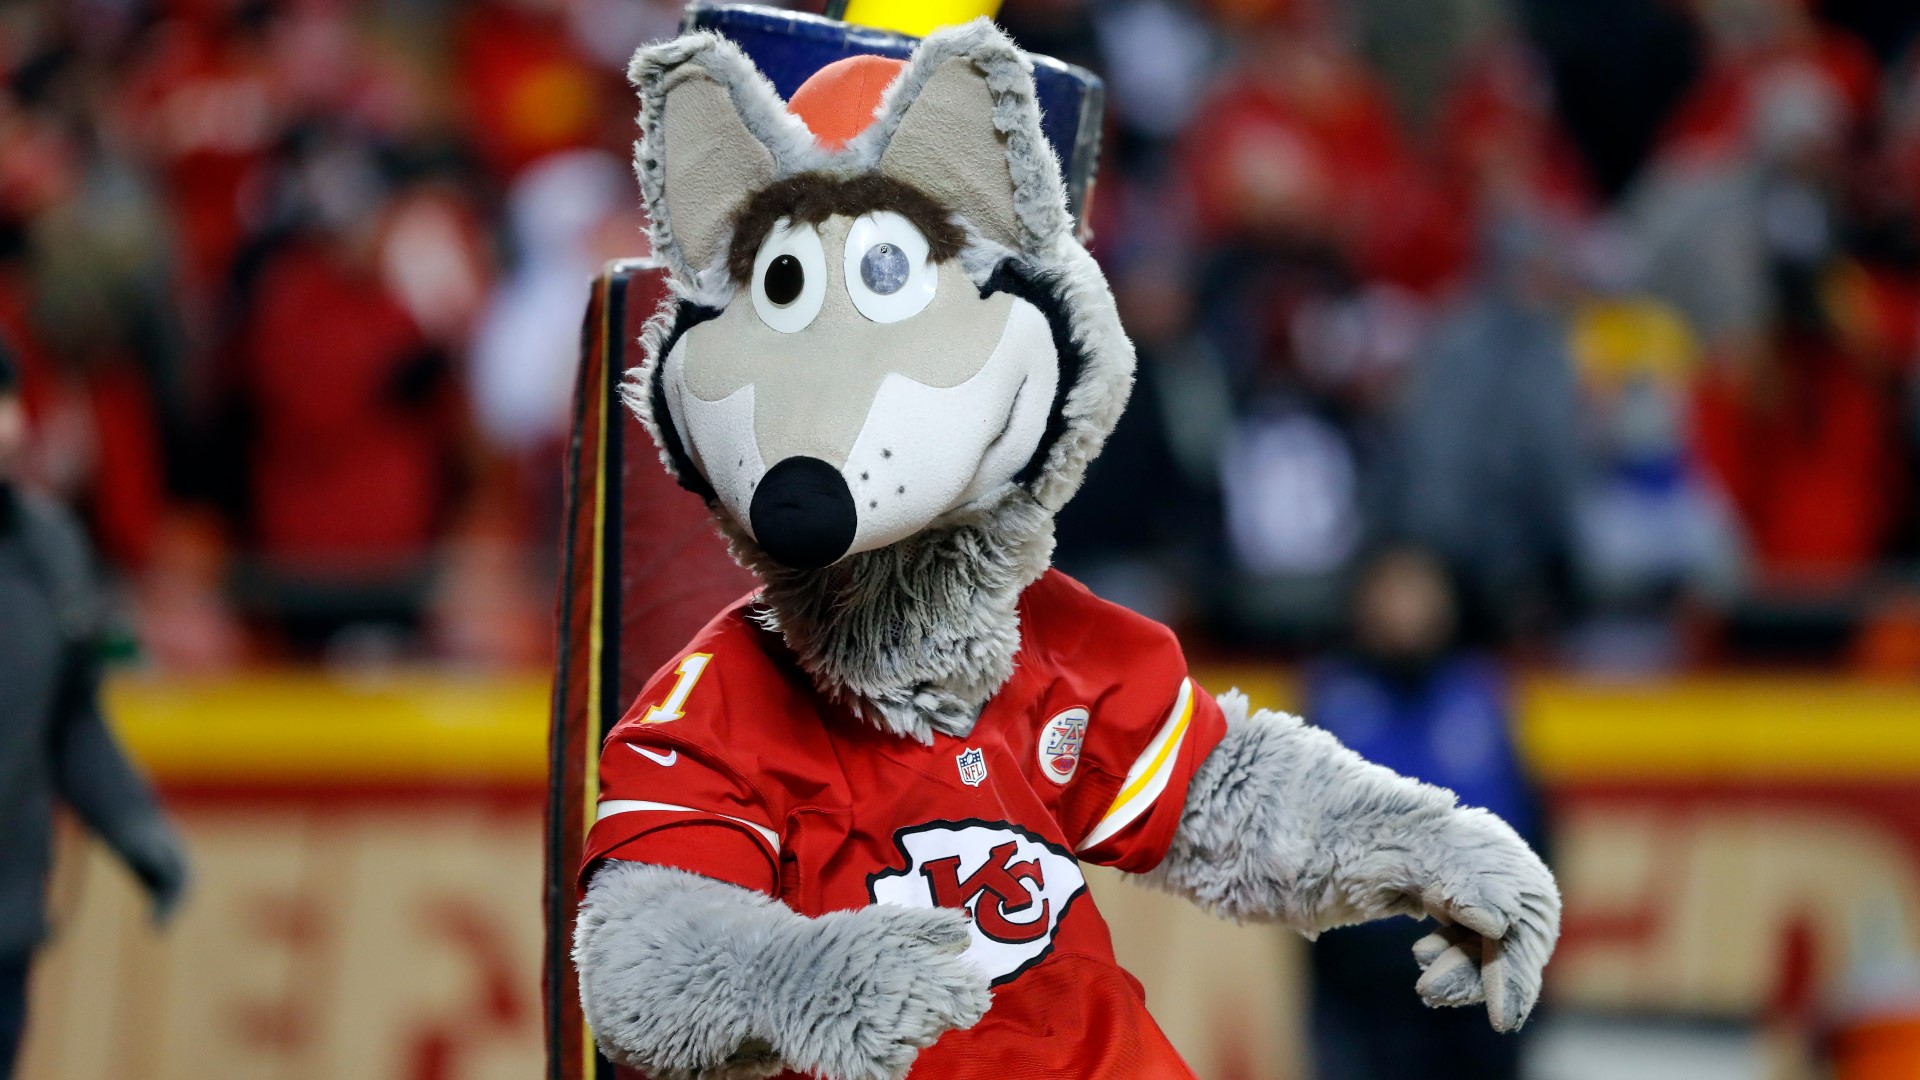 Who is the Kansas City Chiefs' mascot?